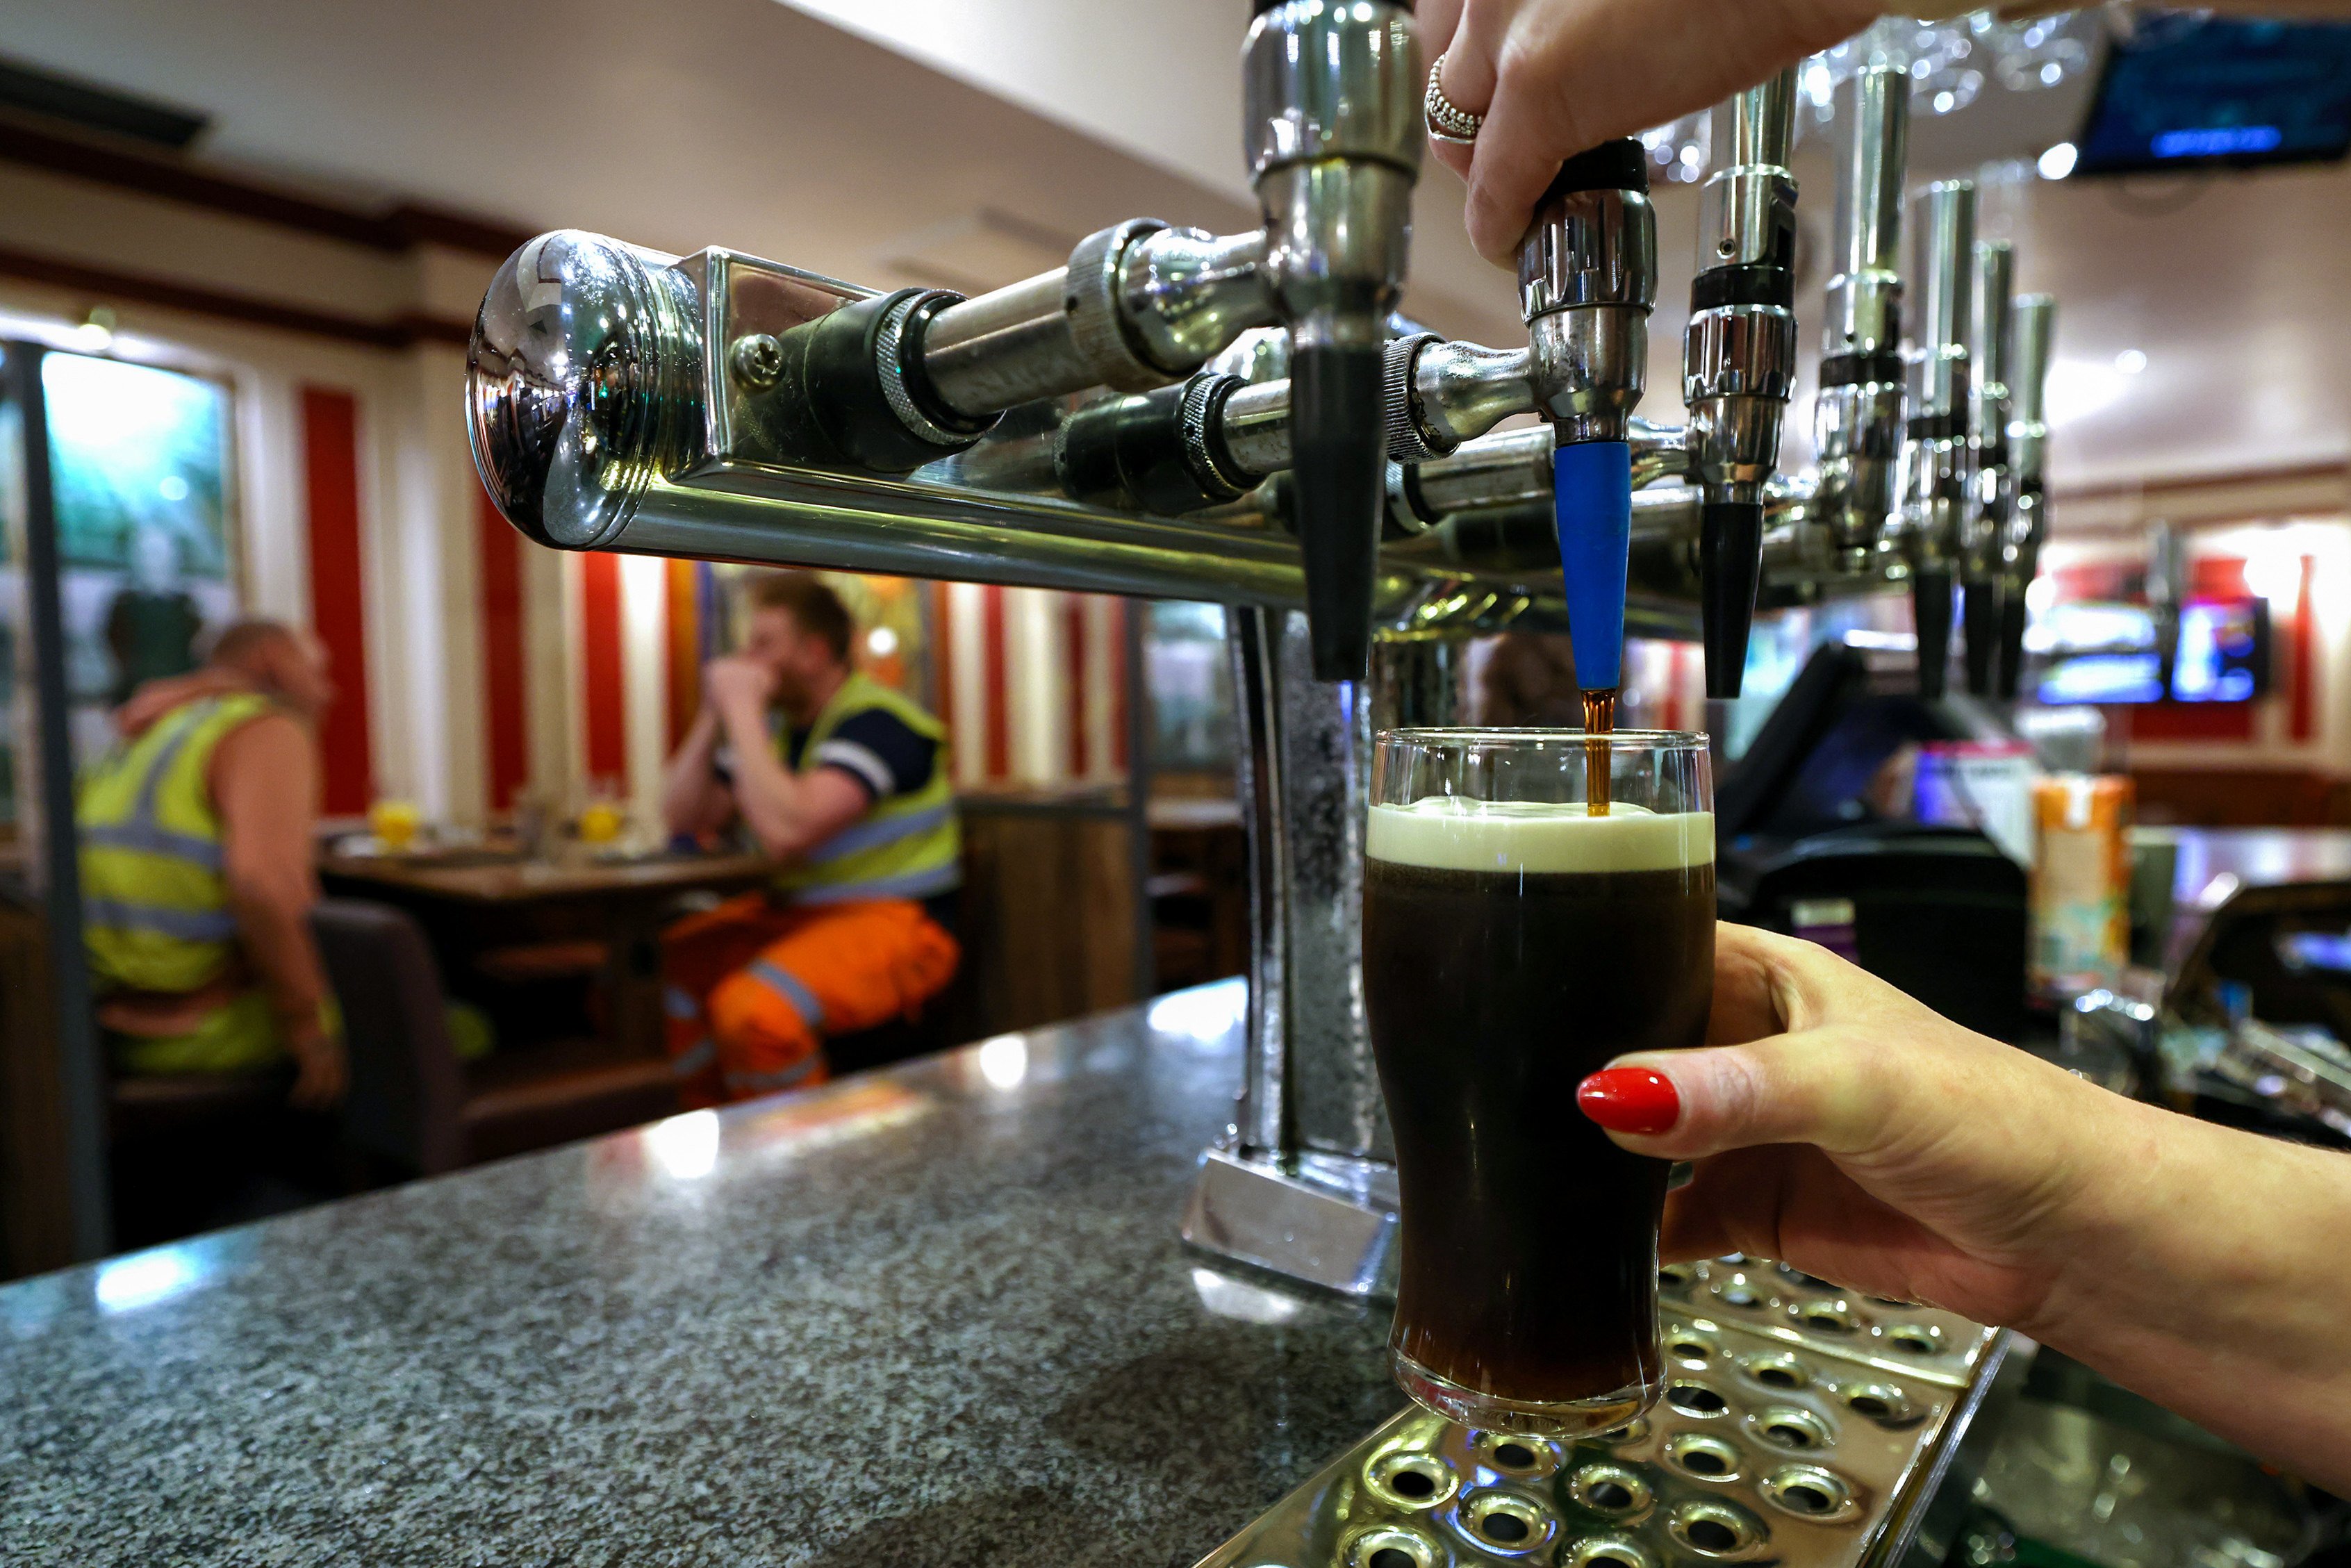 About 15,000 pubs have closed throughout the UK over the last two decades due to rising costs, and changing tastes. Photo: Bloomberg
